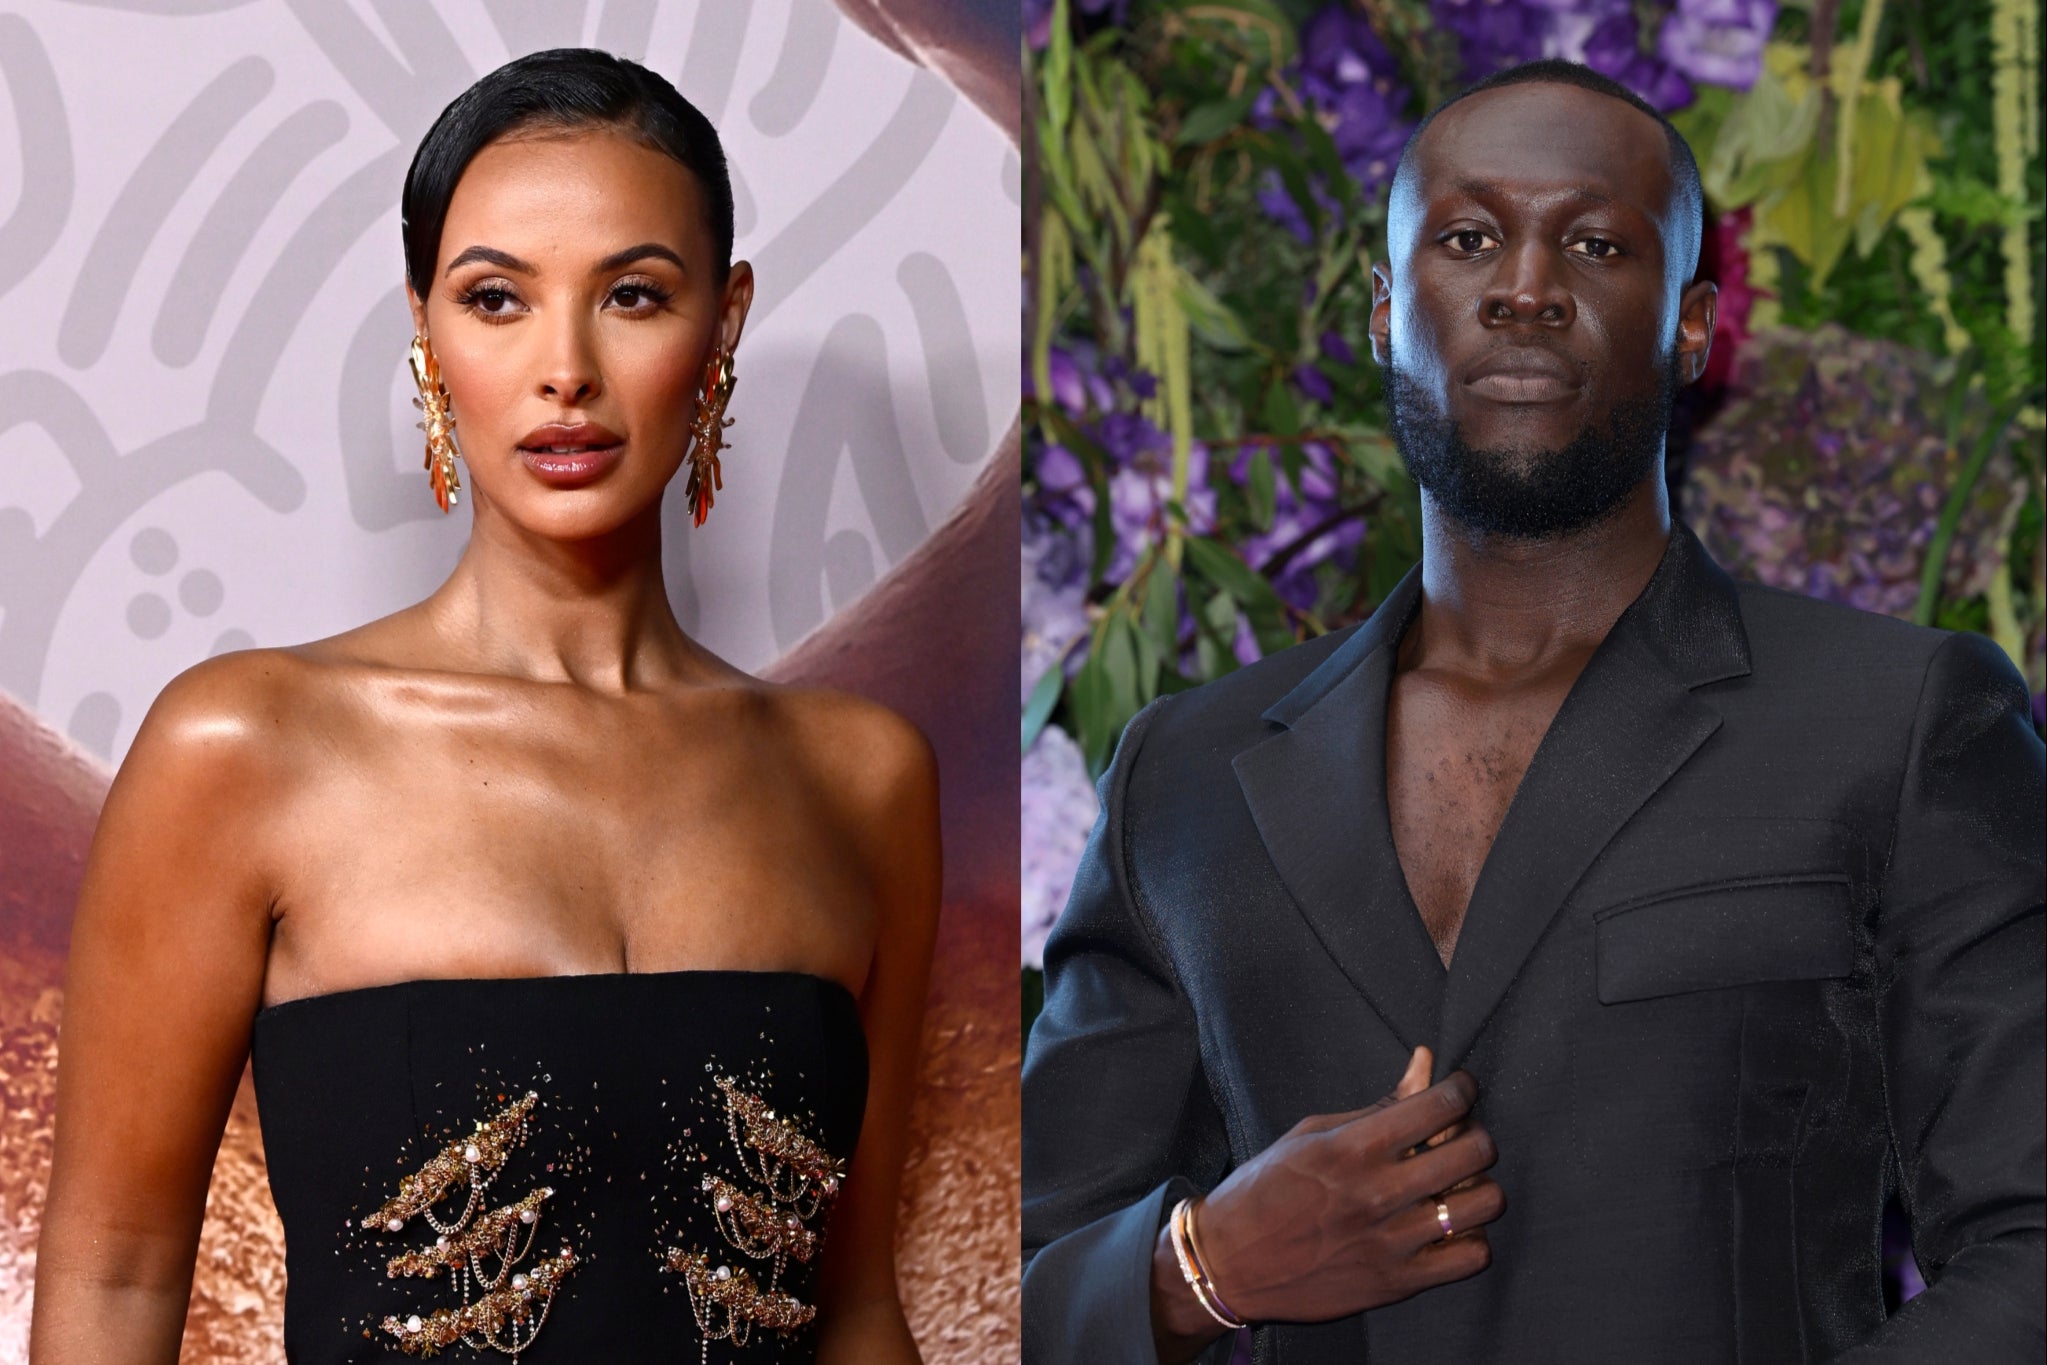 Maya Jama and Stormzy have reportedly gotten back together